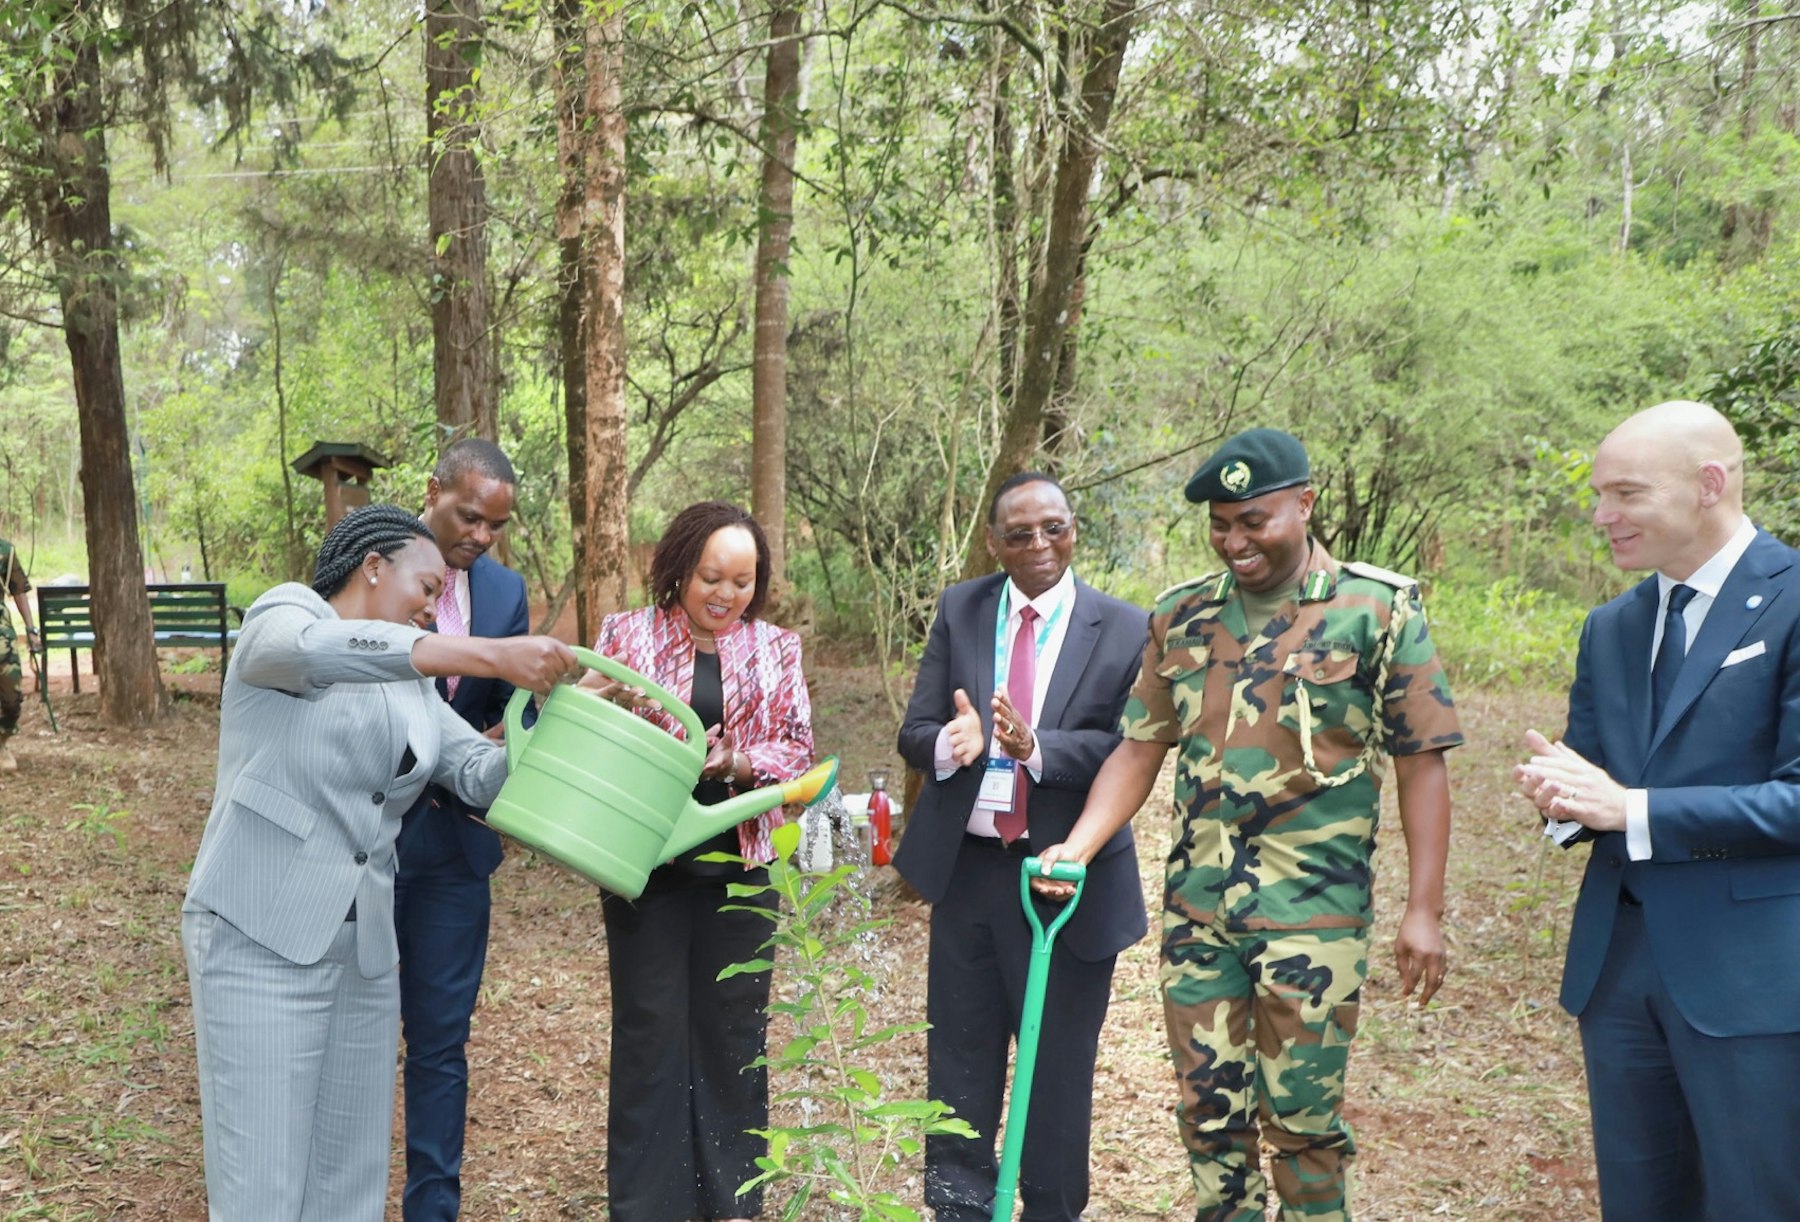 Hon. Roselinda Soipan Tuya, Cabinet Secretary, Ministry of Environment and Forestry, commemorates the fourth edition of the Kusi Ideas Festival in the presence of Dr Wilfred Kiboro, Chairman of NMG, and other delegates in Karura Forest.